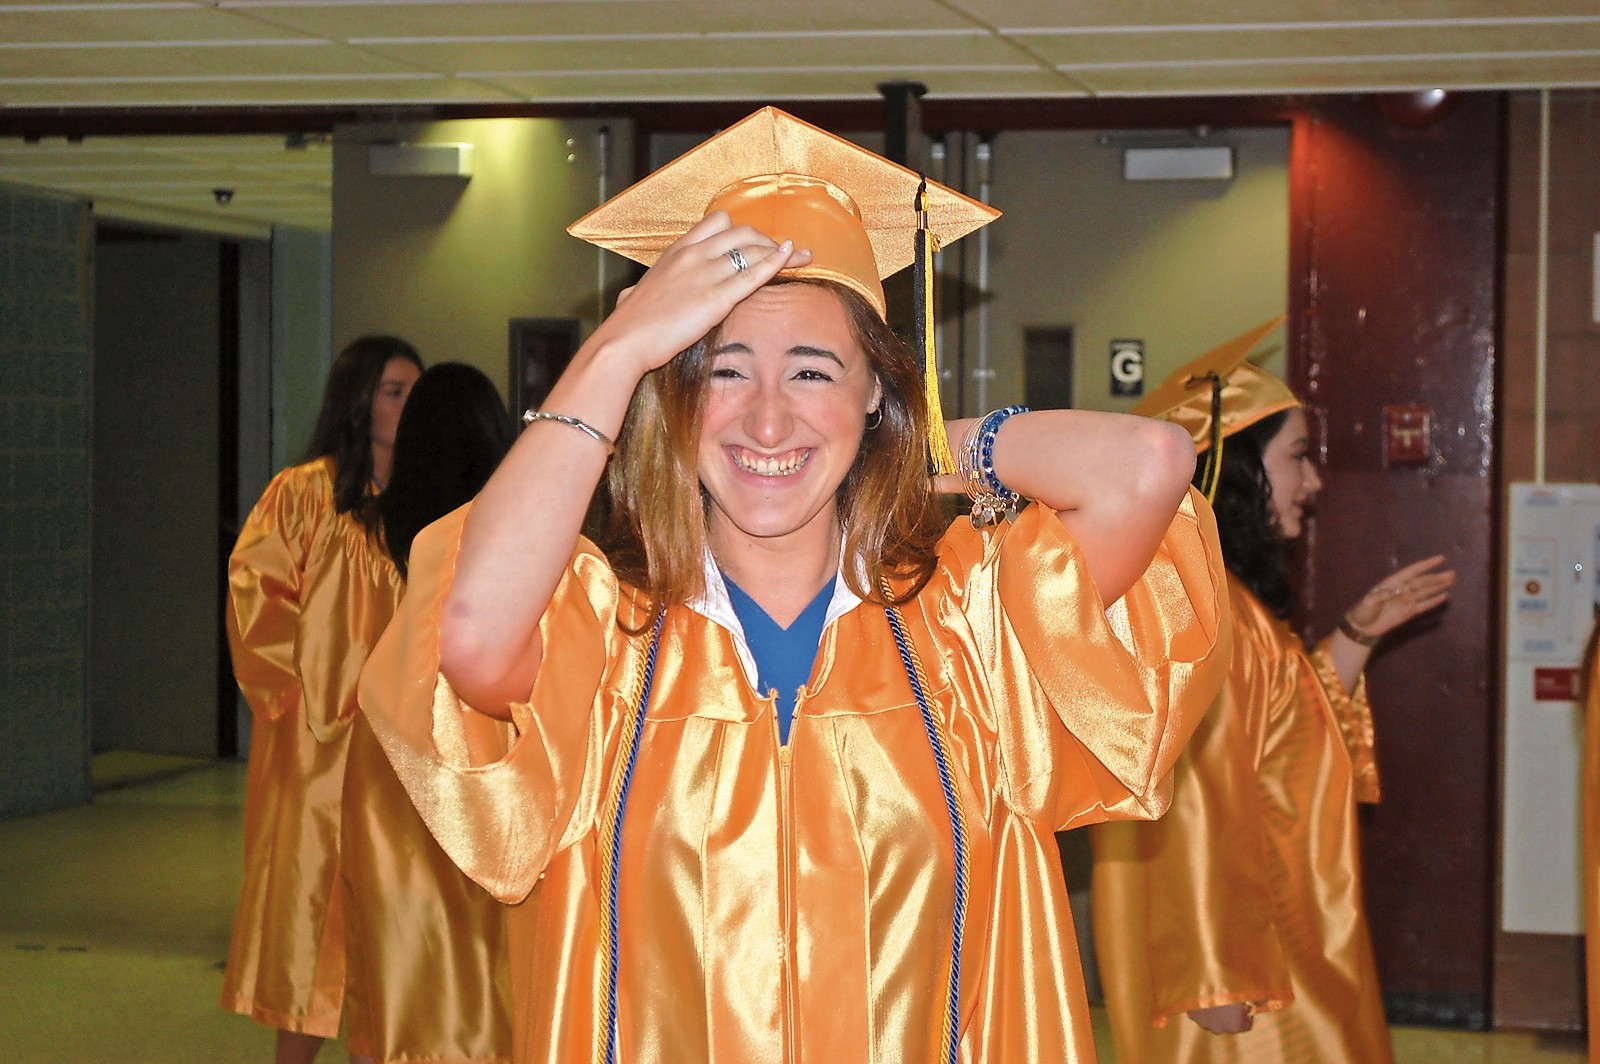 Jennifer Rodriguez made sure her cap was on straight before the ceremony began.